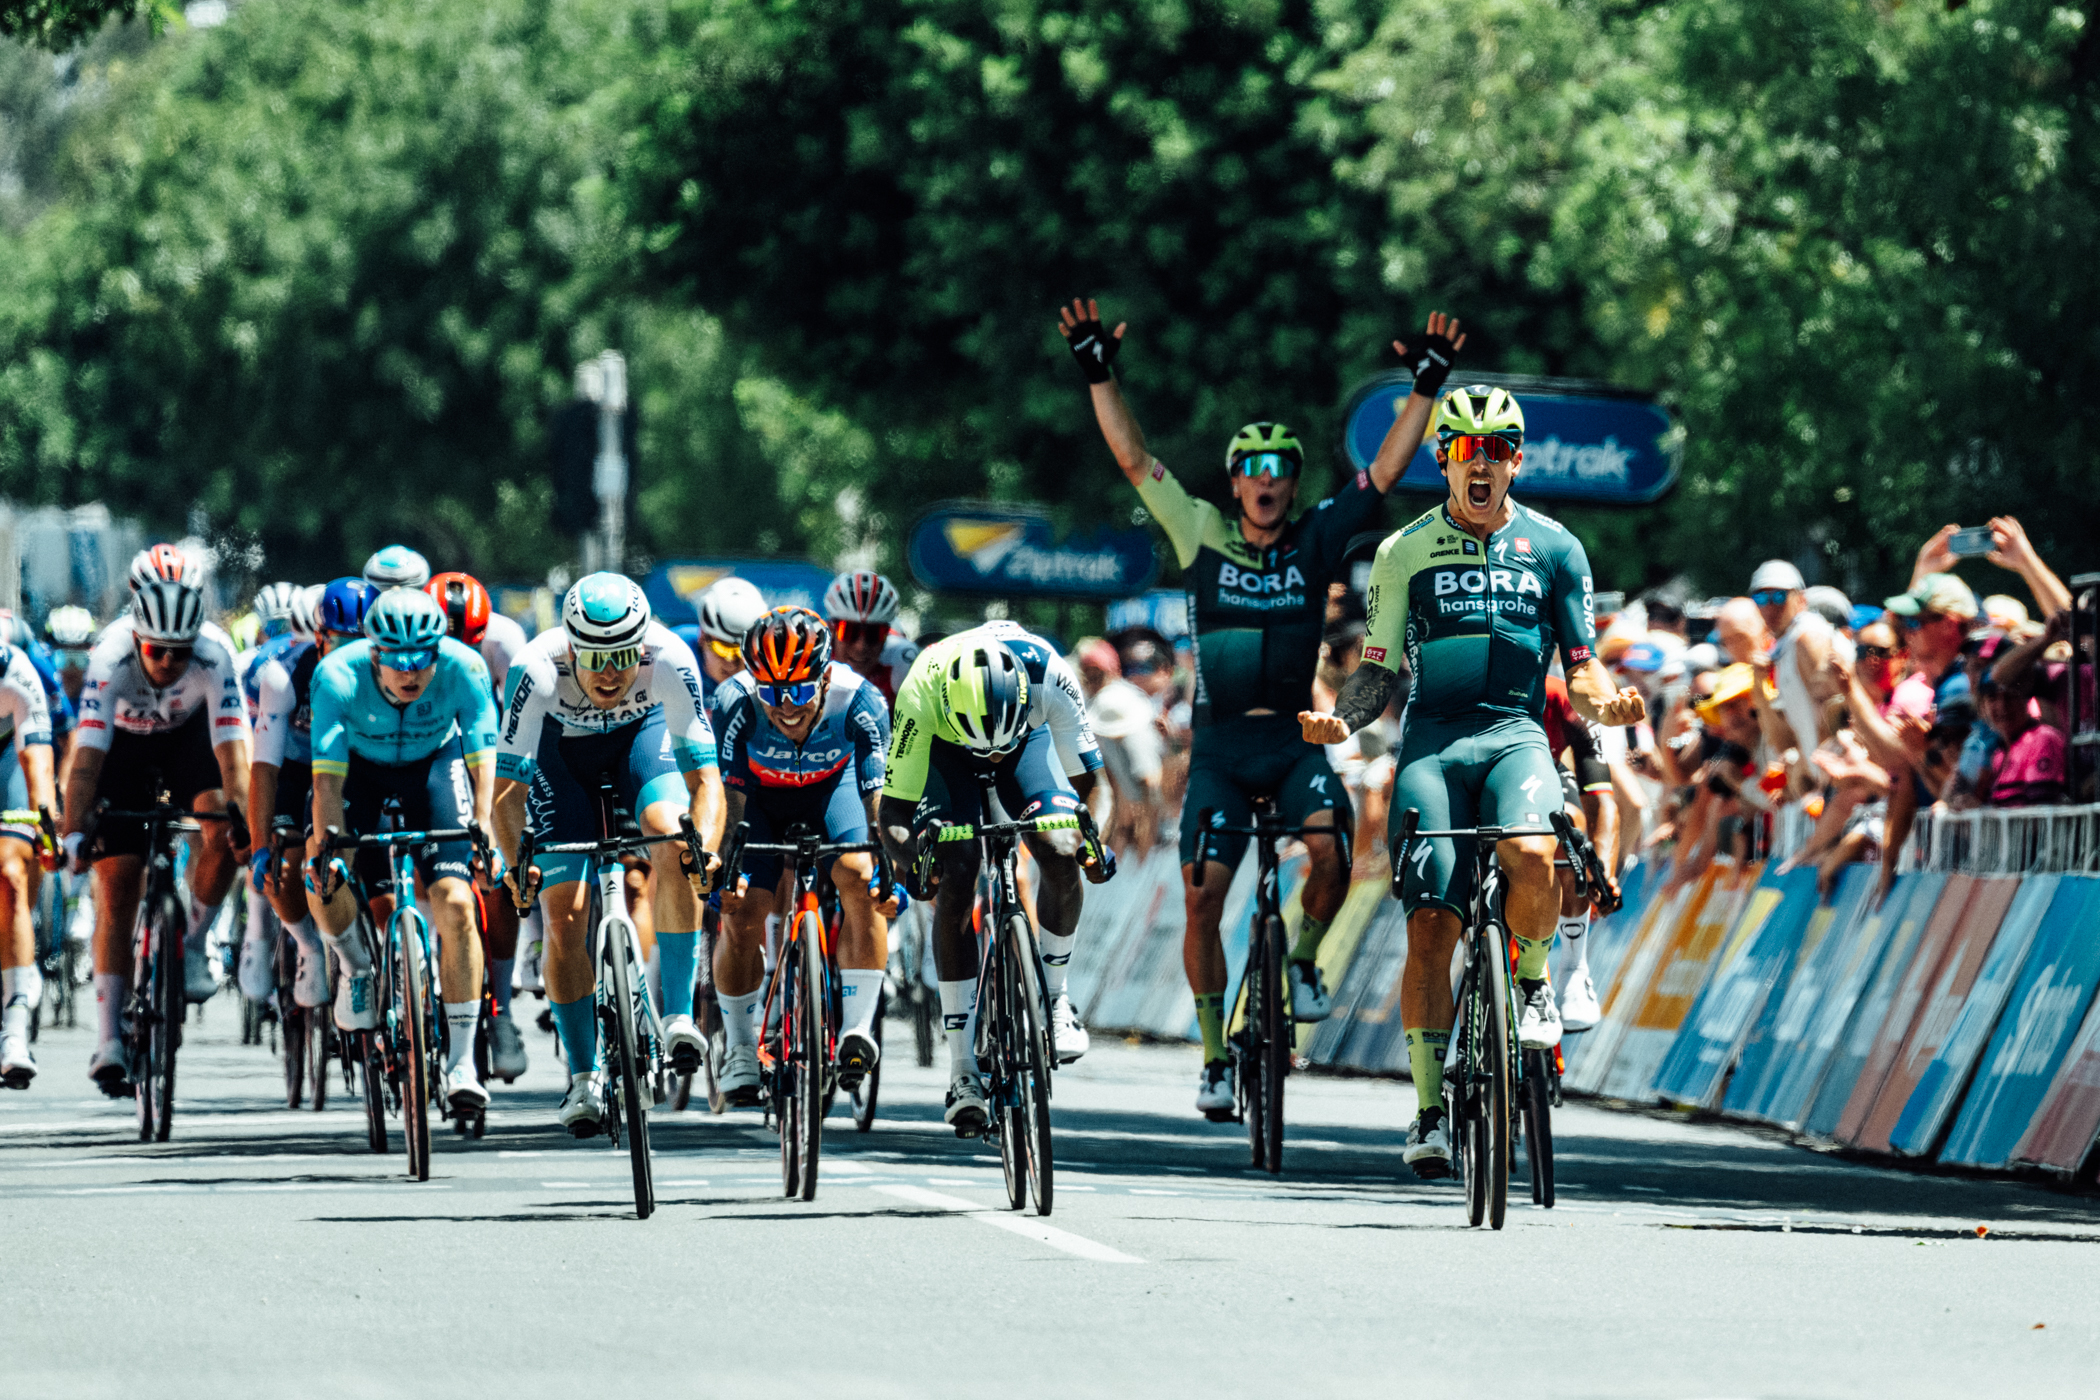 Big win for Bora’s Welsford, Archie Ryan solid at Tour Down Under | Video